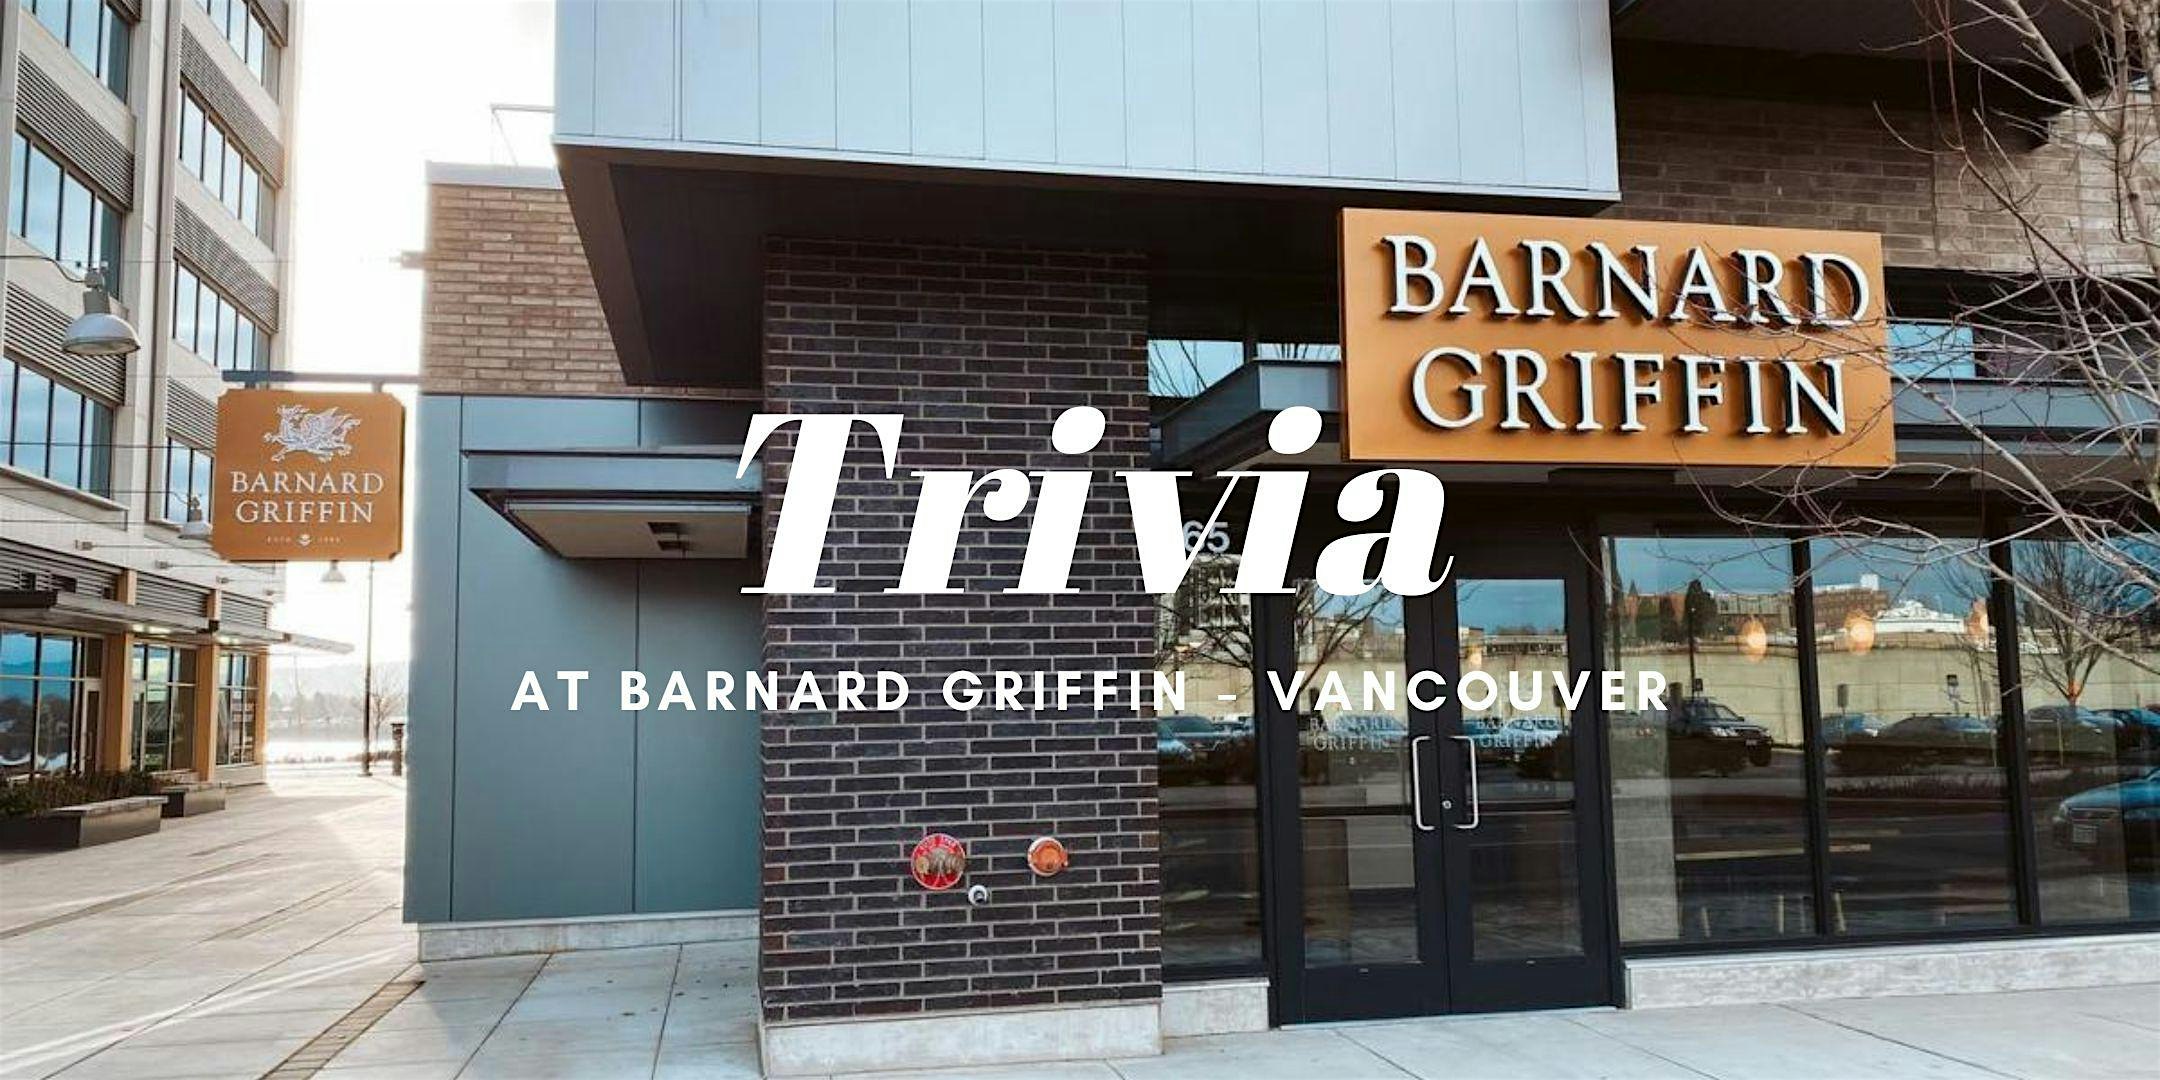 Trivia night at Barnard Griffin Winery - VANCOUVER